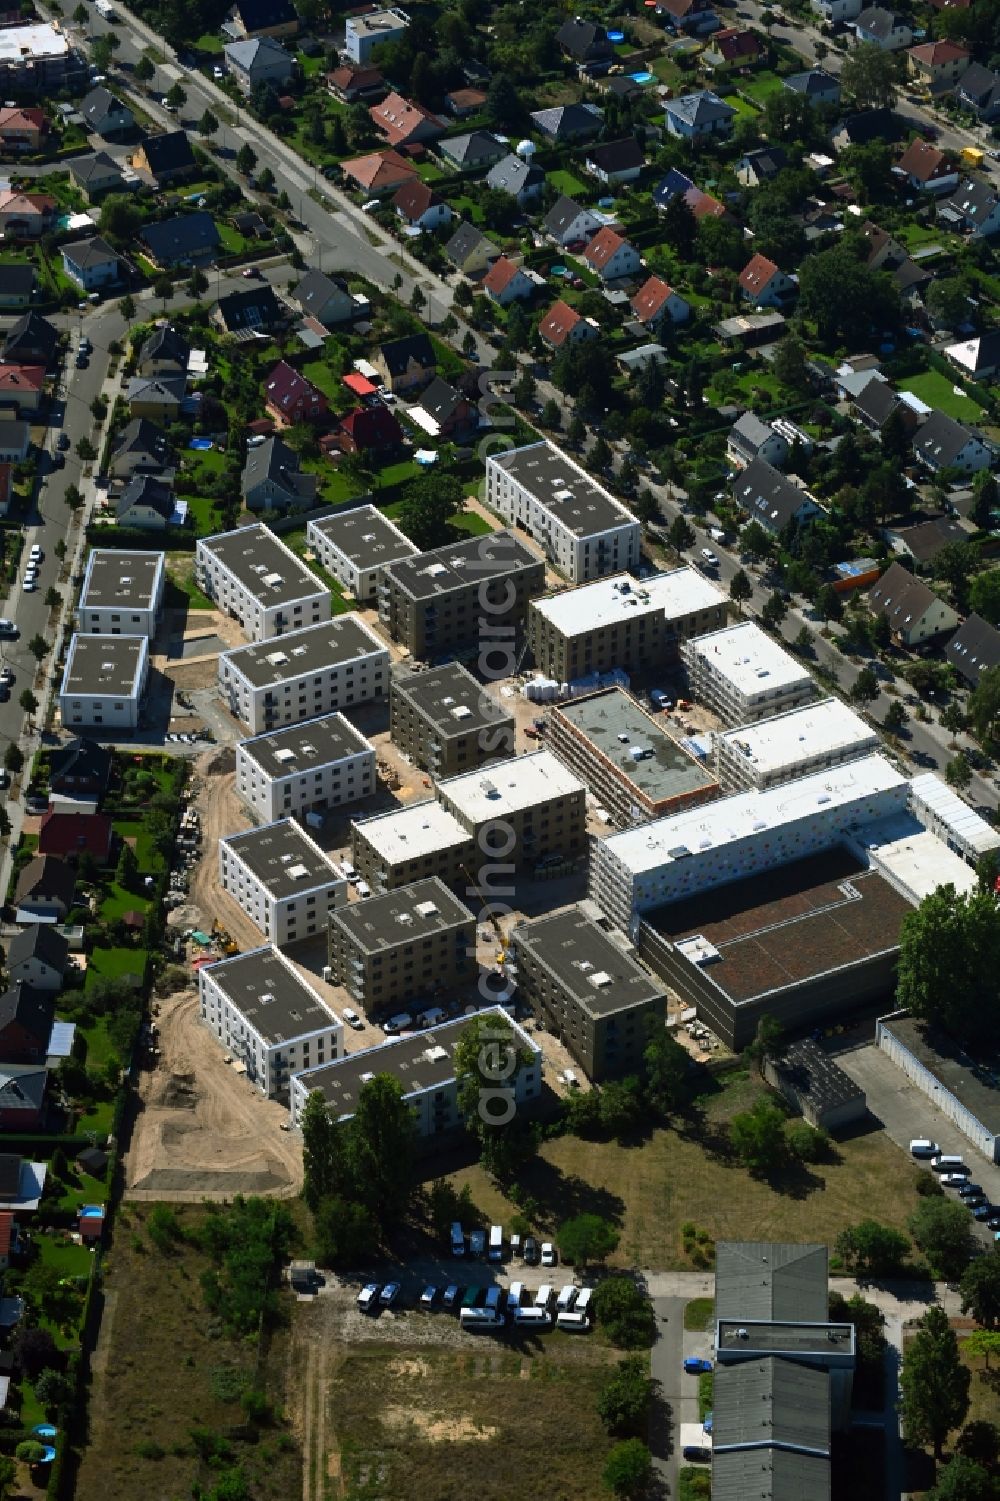 Berlin from above - Construction site to build a new multi-family residential complex of Johannisgaerten between of Strasse am Flugplatz and Melli-Beese-Strasse in the district Johannisthal in Berlin, Germany